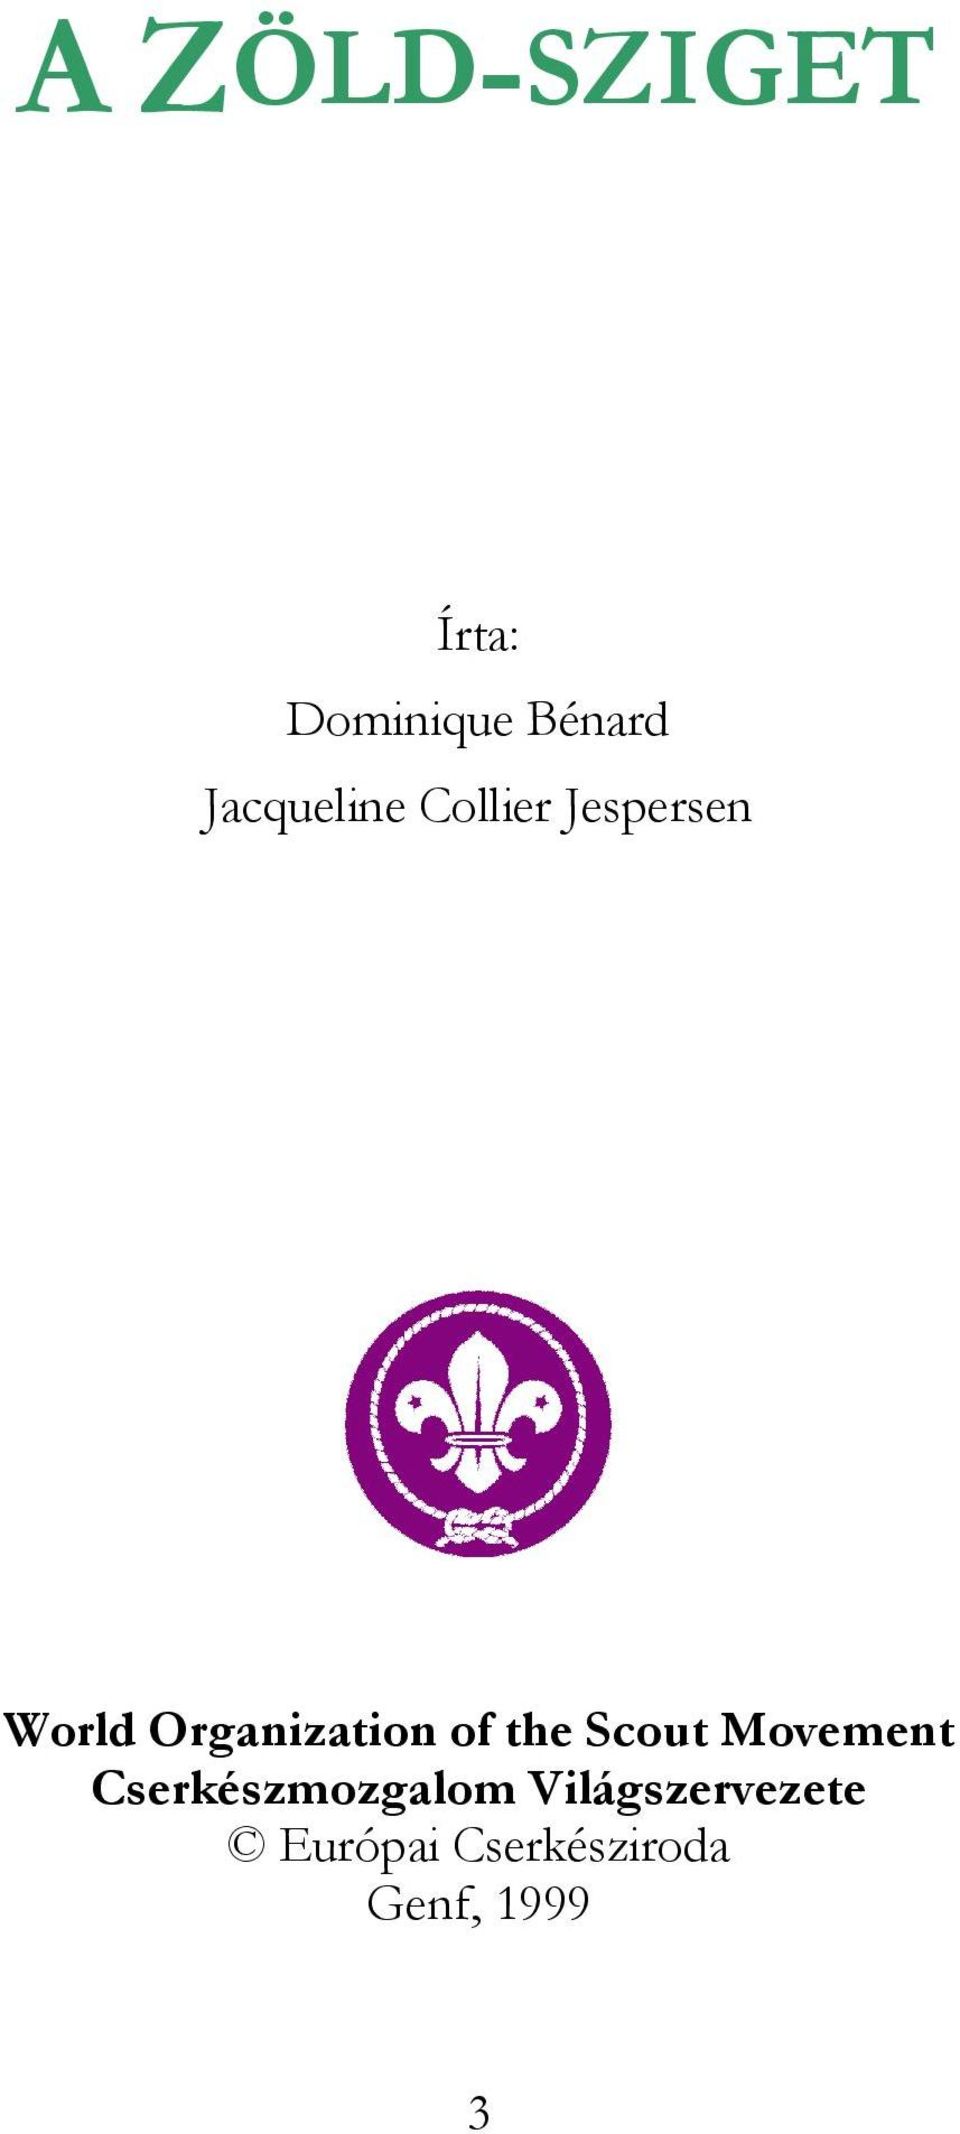 Organization of the Scout Movement